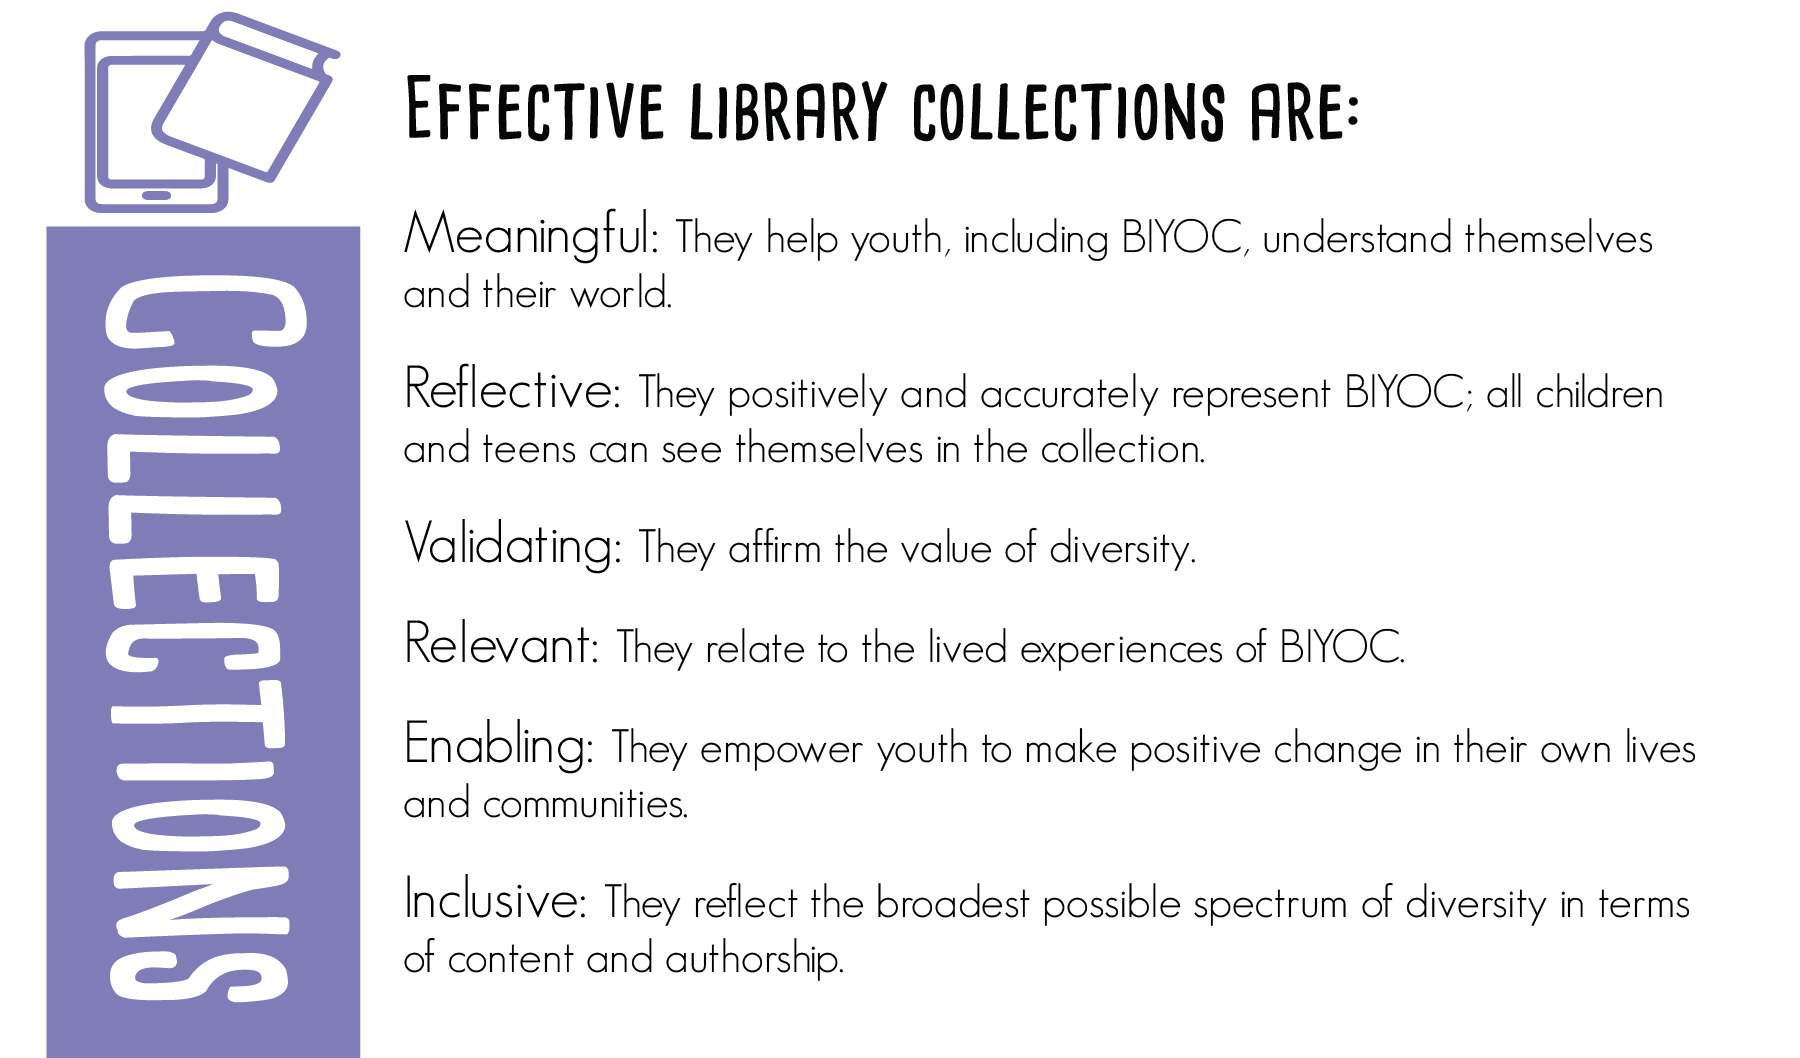 Effective library collections are:  Meaningful: They help BIYOC understand themselves and their world.  Reflective: They positively and accurately represent BIYOC; all youth can see themselves in the collection.  Validating: They affirm the value of diversity.  Relevant: They relate to the lived experiences of BIYOC.  Enabling: They empower youth to make positive change in their own lives and communities.  Inclusive: They reflect the broadest possible spectrum of diversity in terms of content and authorship.